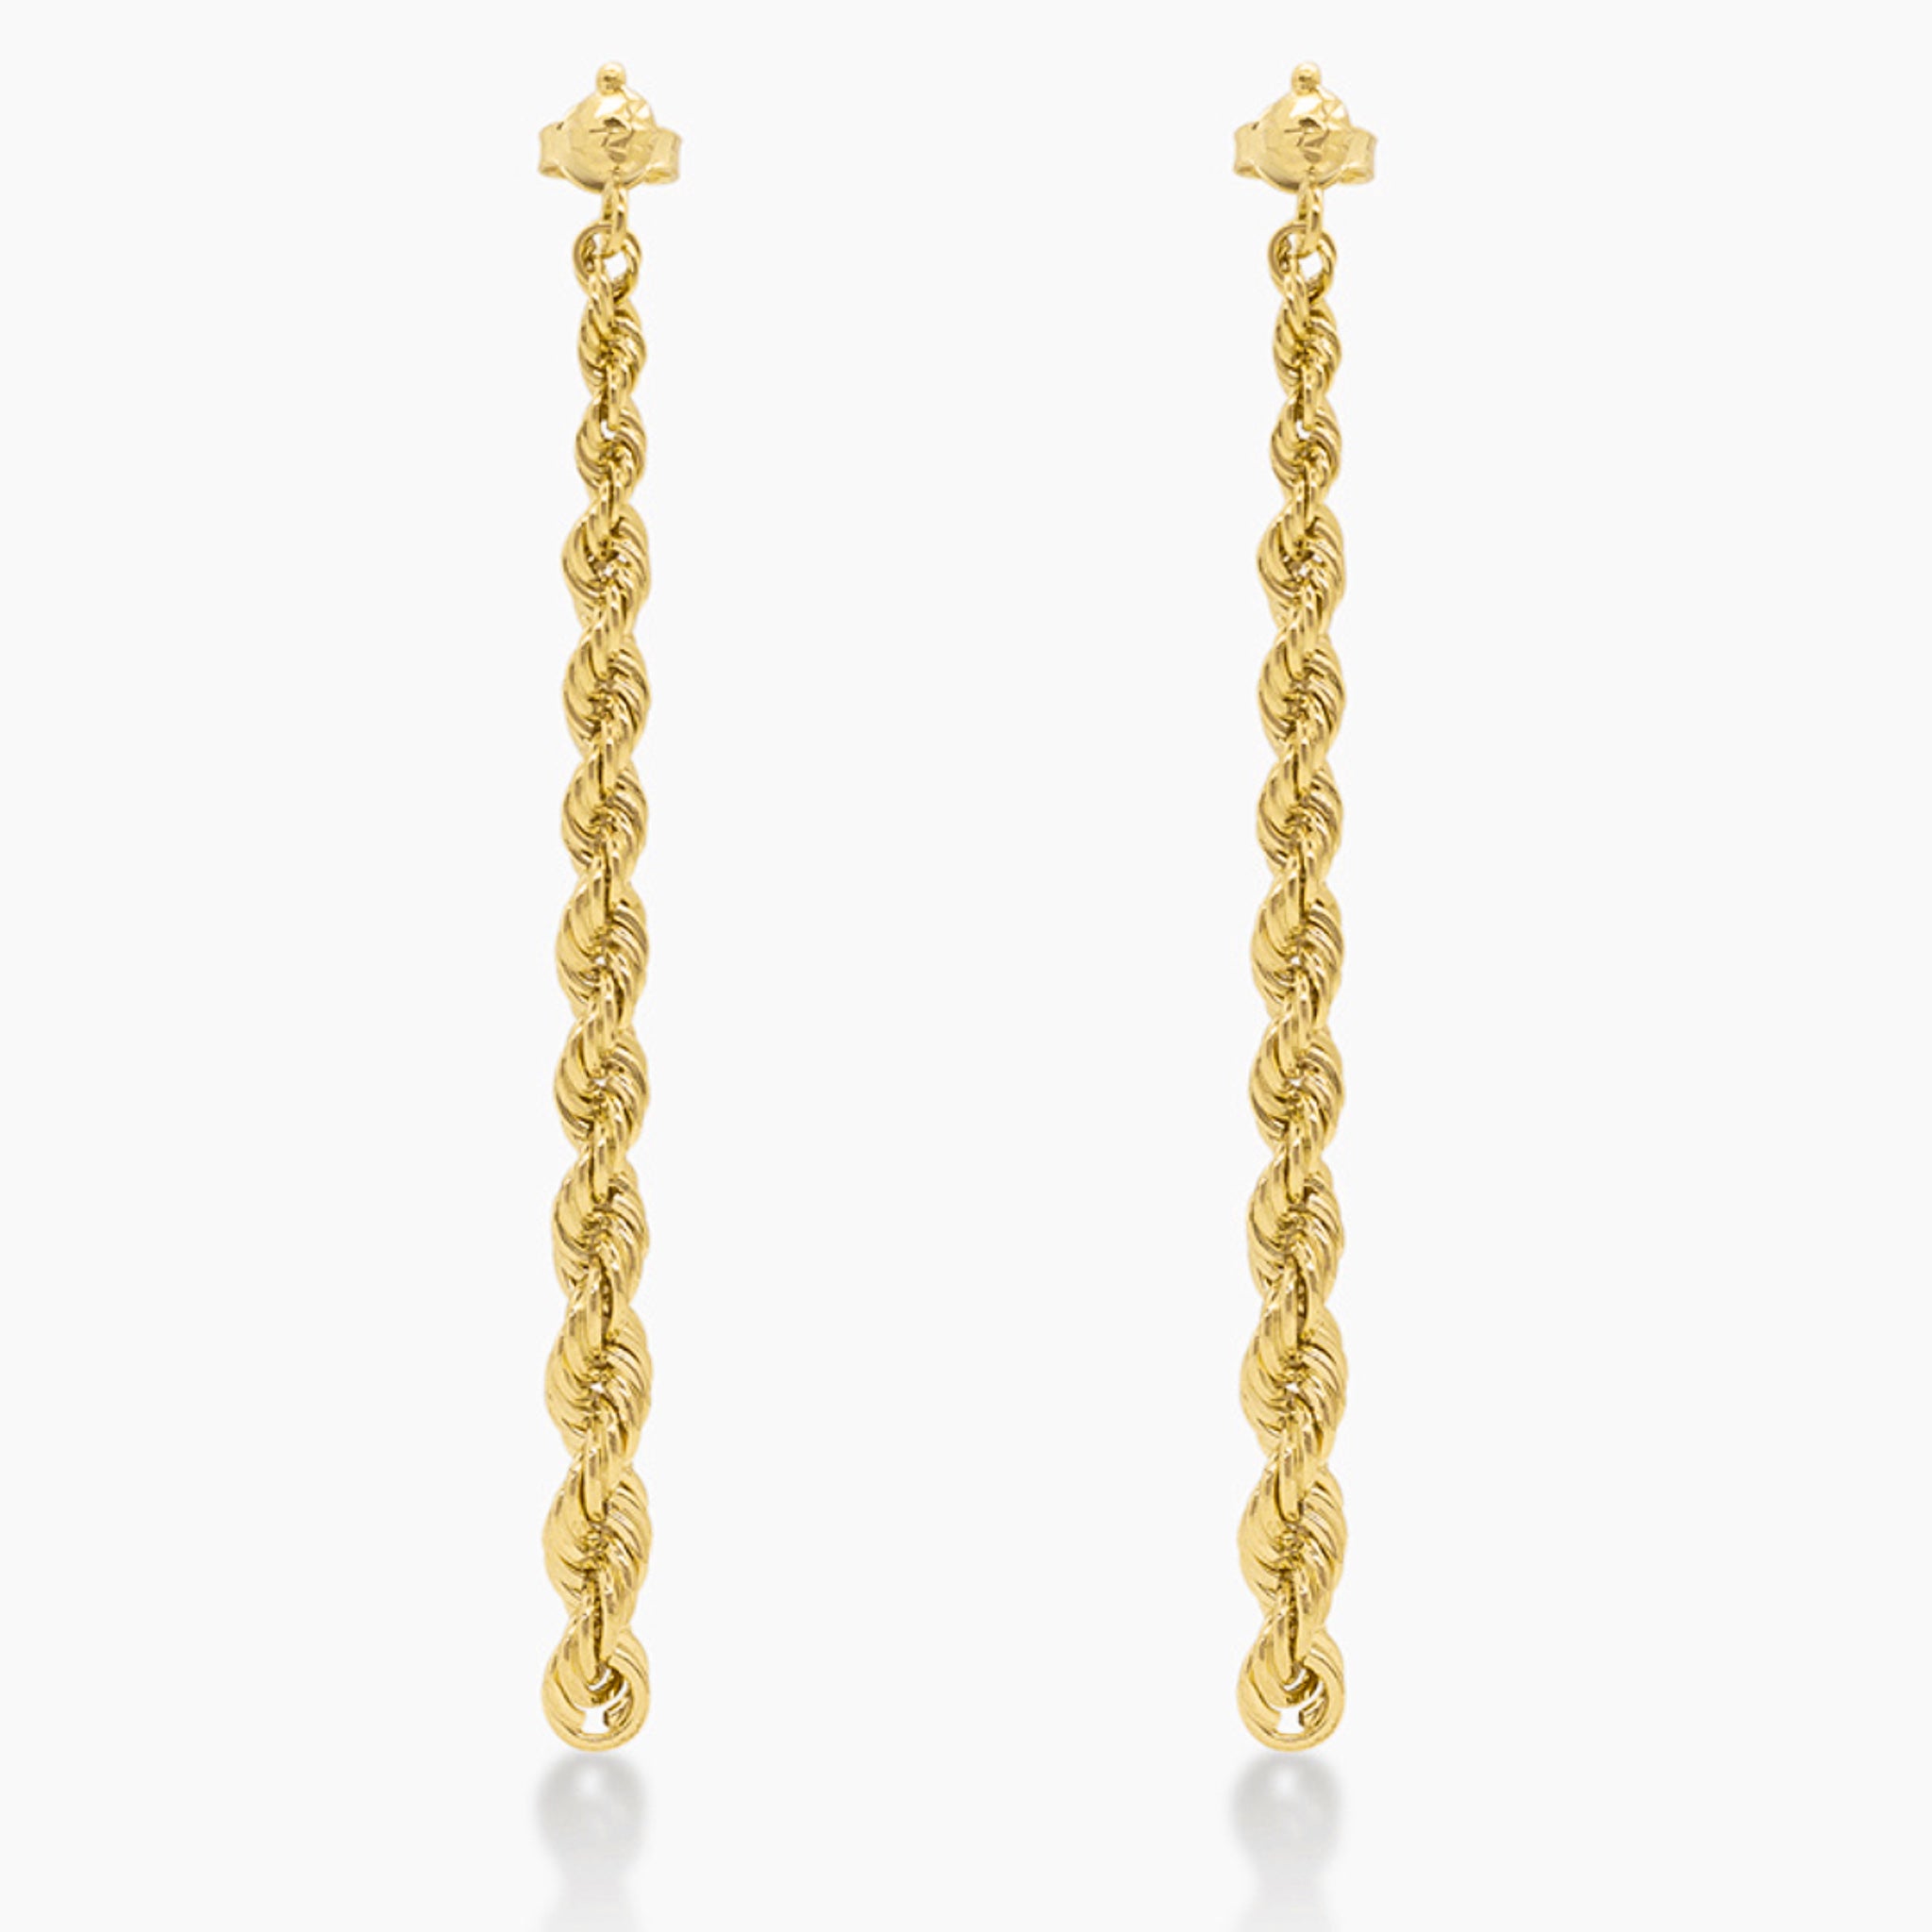 14K YELLOW GOLD TAPERED ROPE DROP EARRINGS